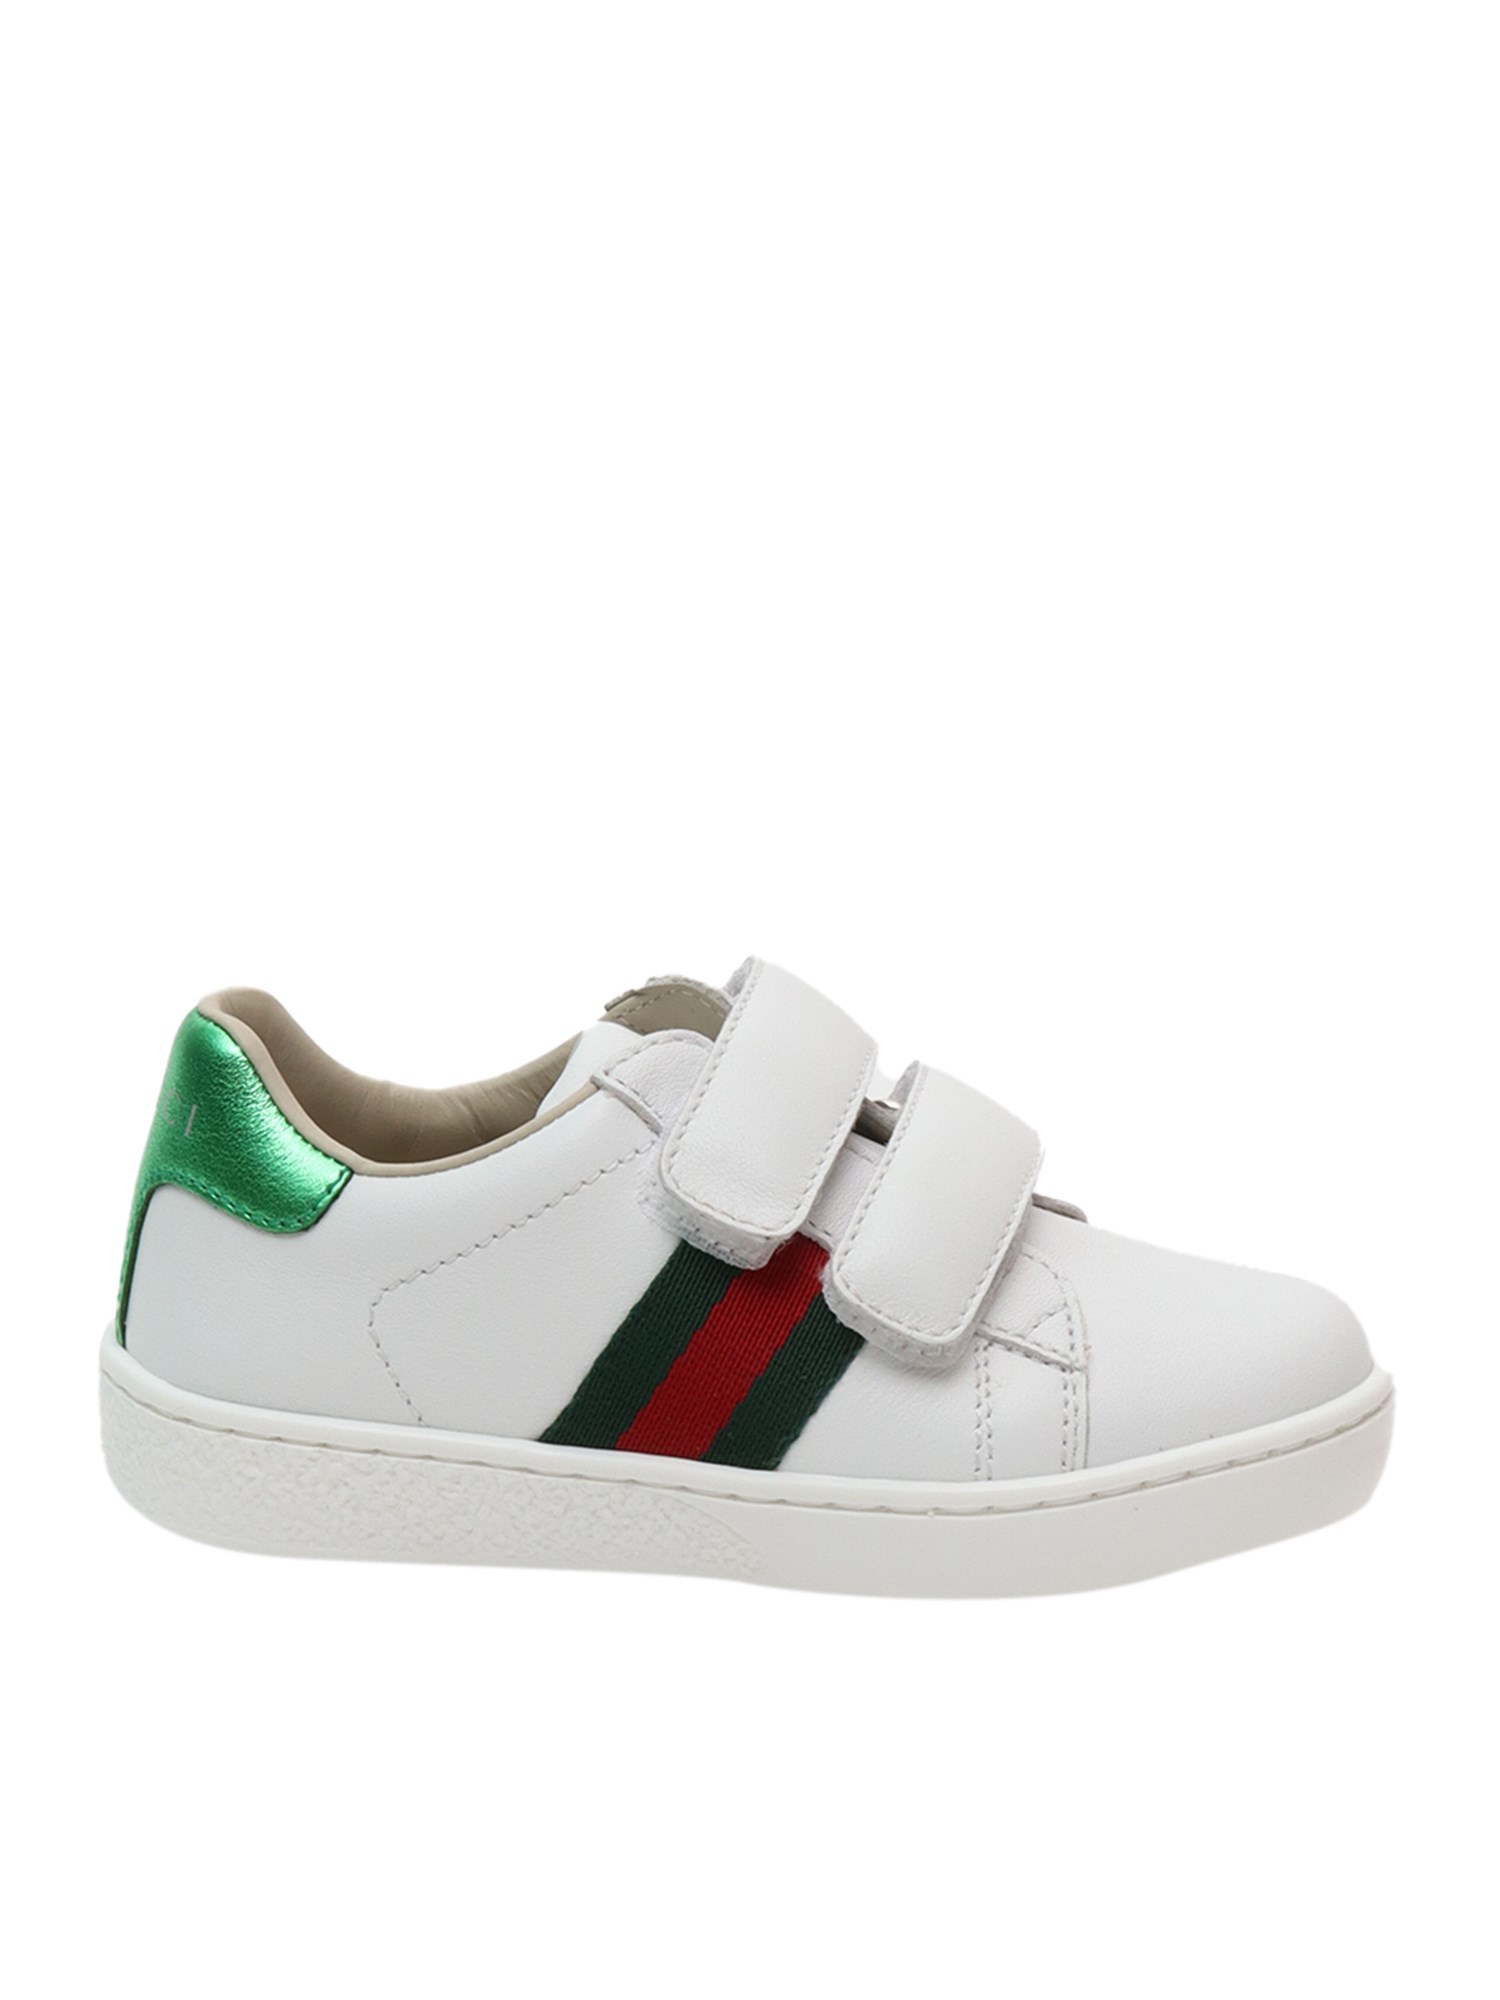 Gucci New Ace Sneakers In White